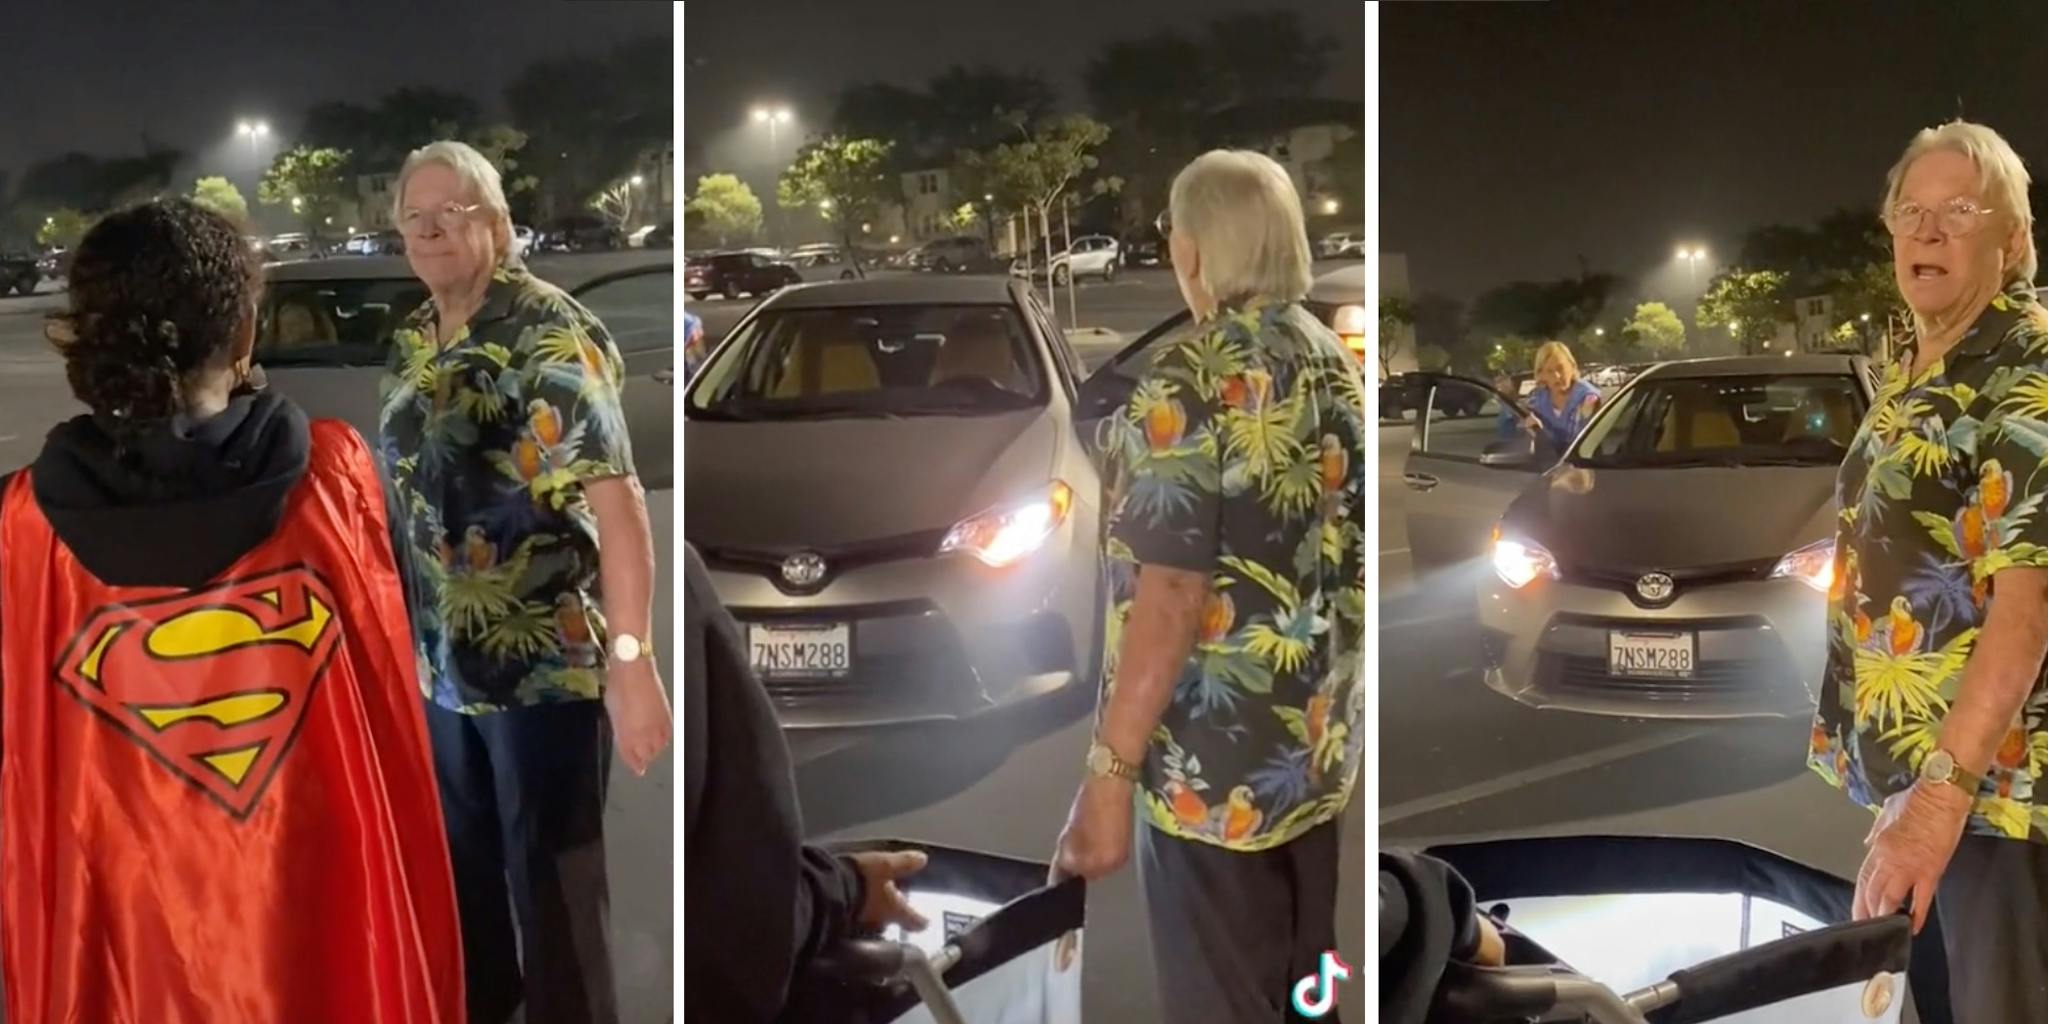 ‘Y’all were literally just kids being kids:’ Viral TikTok shows man confronting teens over a shopping cart in Kohl’s parking lot